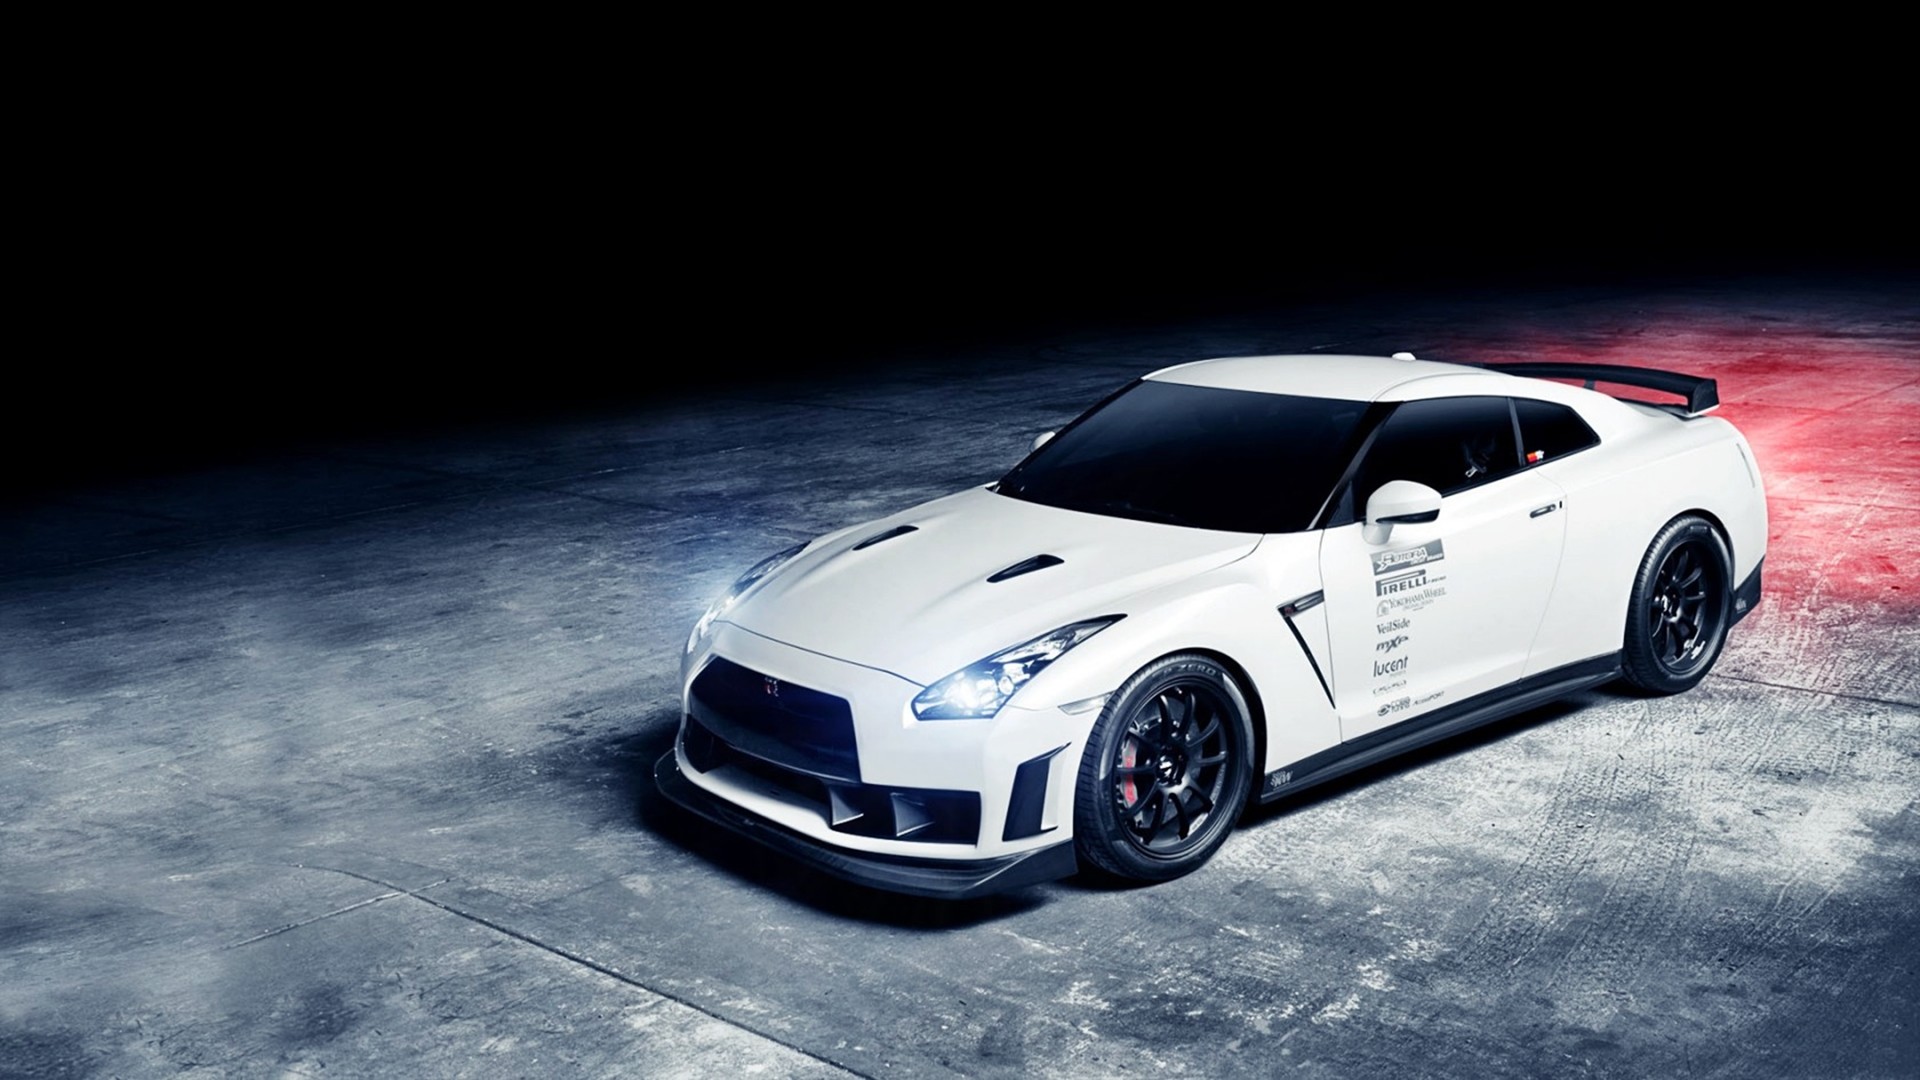 Nissan Cars Wallpapers Nissan Skyline R35 Hd Wallpapers 1080p Cars ...